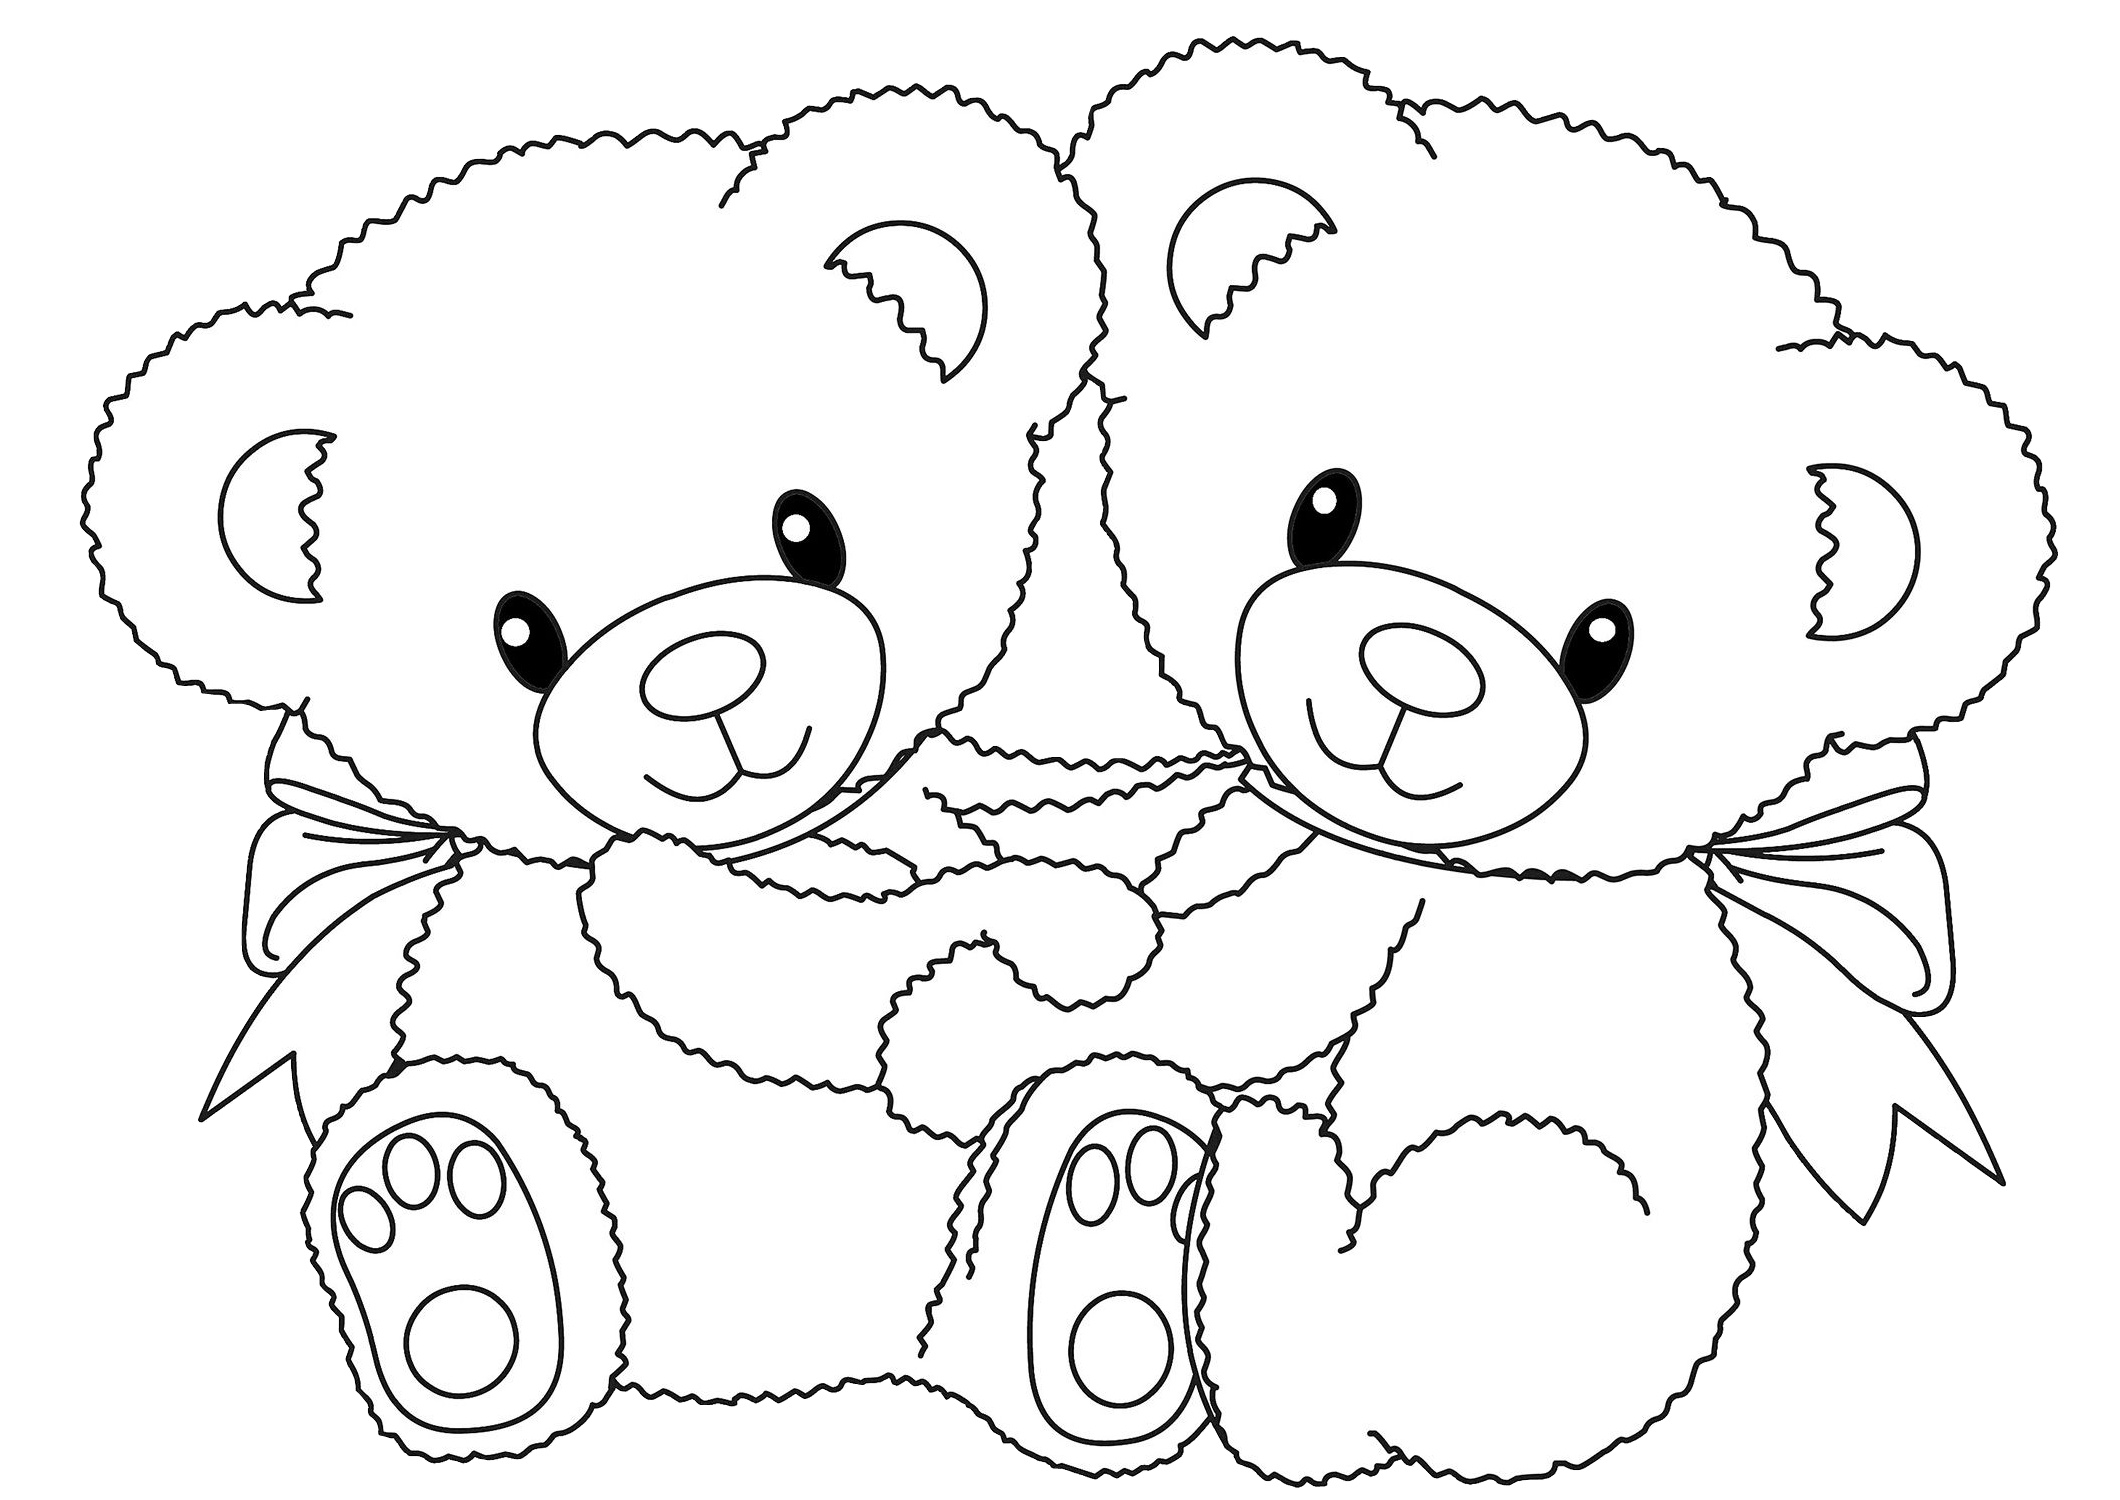 Two Cute Teddy Bear Coloring Pages Print Color Craft - Bank2home.com